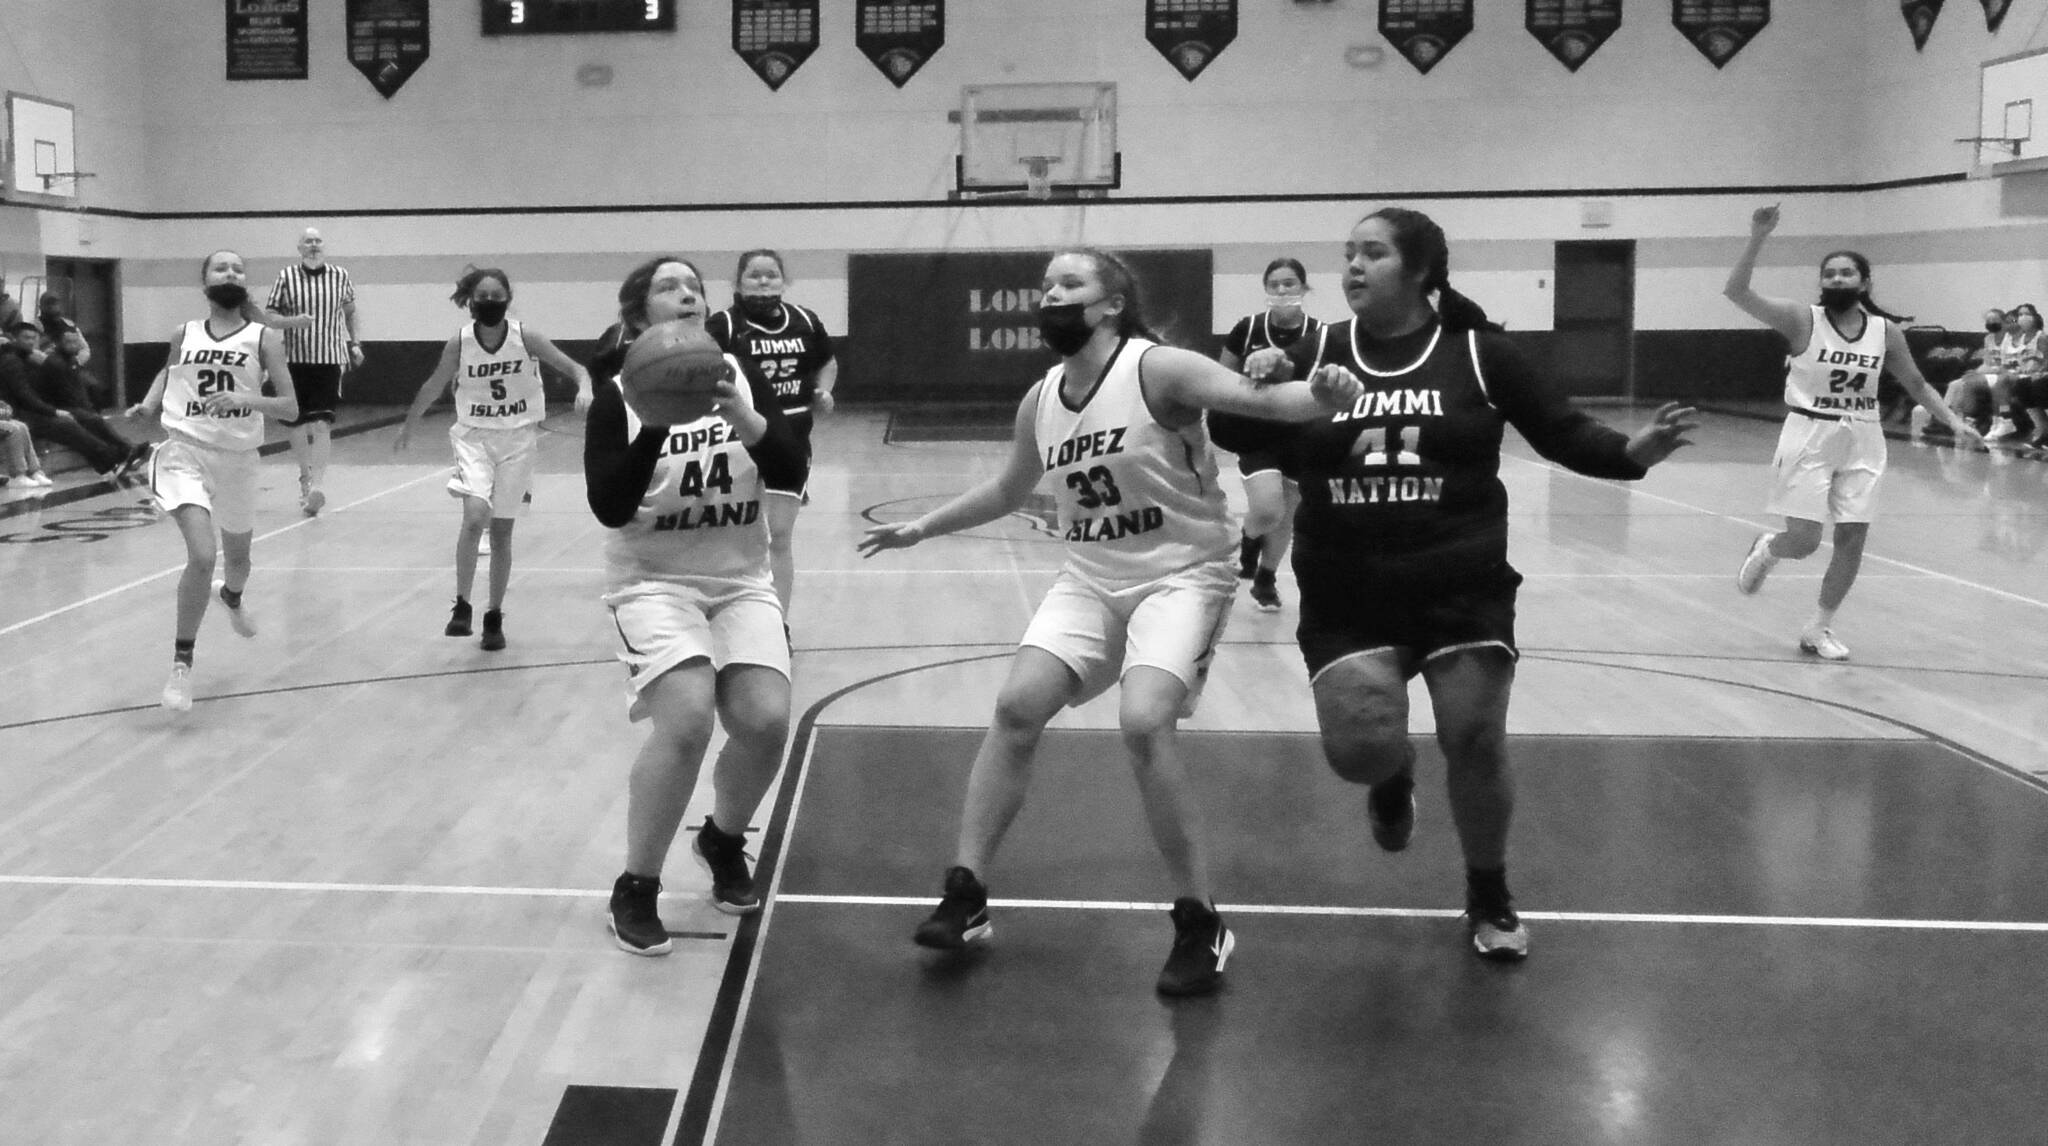 Betty Burt (44) prepares to shoot while Danielle Arnott (33) screens for her and Naima Garcia  (20), Michelle Gil (5), and Melissa Valencia (24) move in on a fast break versus Lummi Nation.